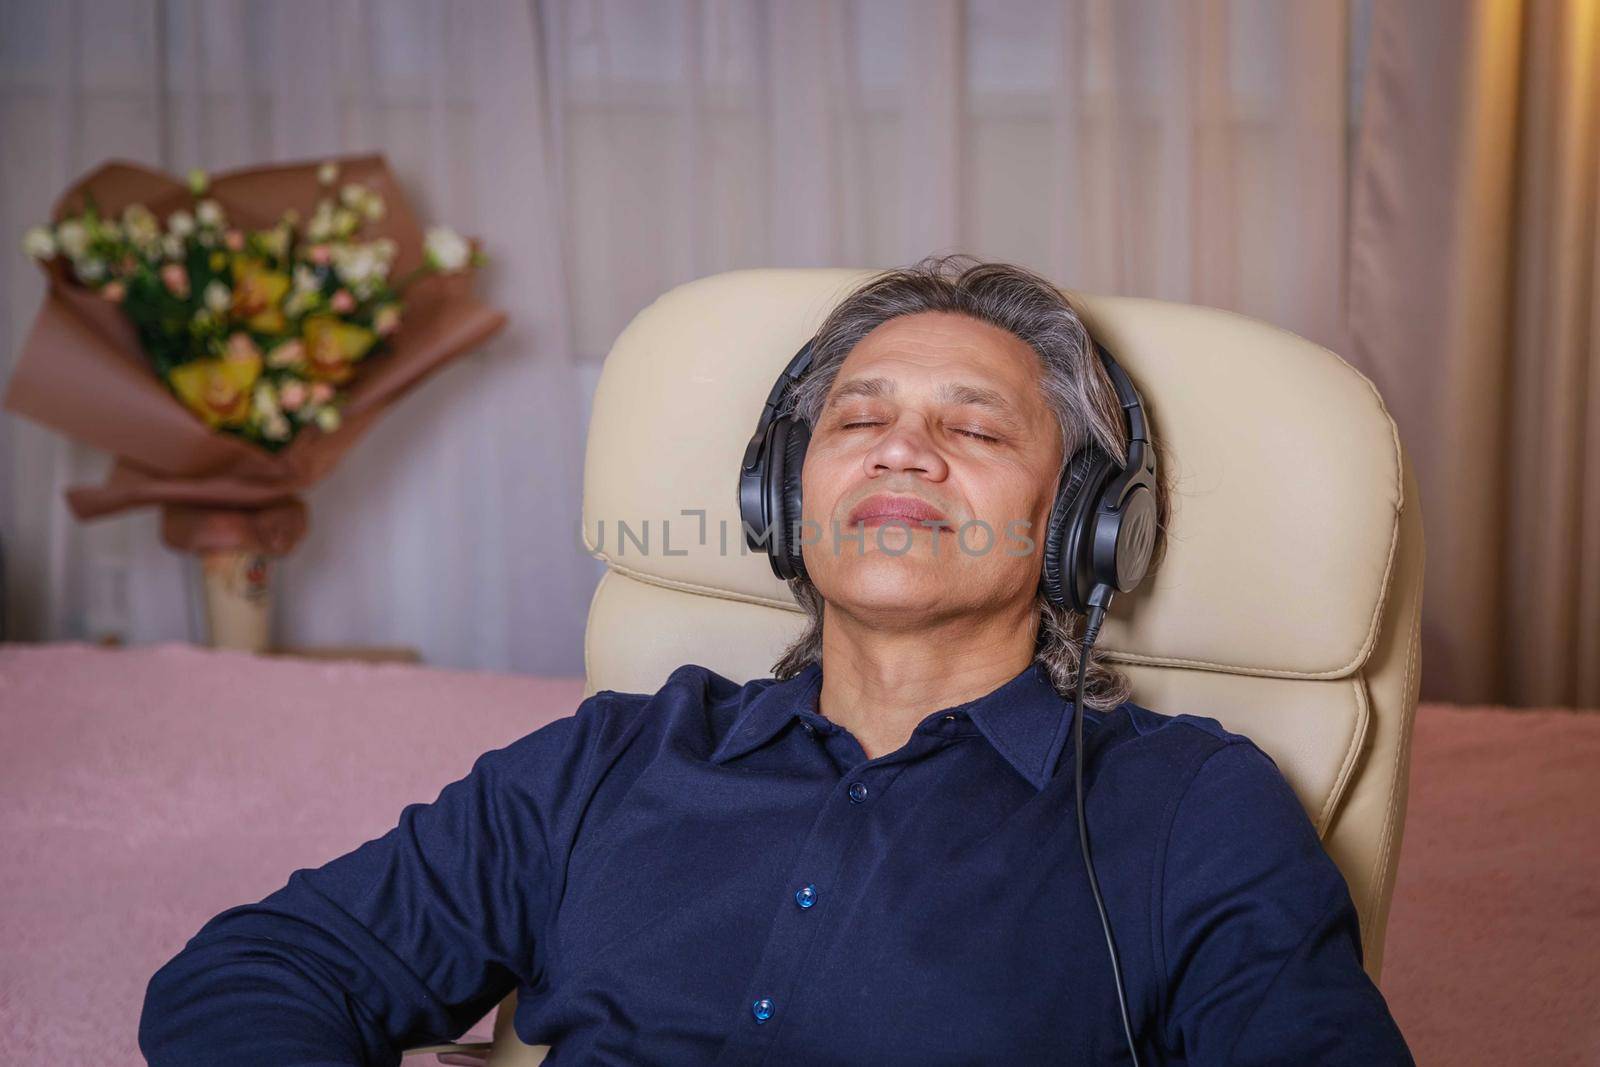 50-year-old man listens to music on headphones at home, sitting in a chair. by Yurich32